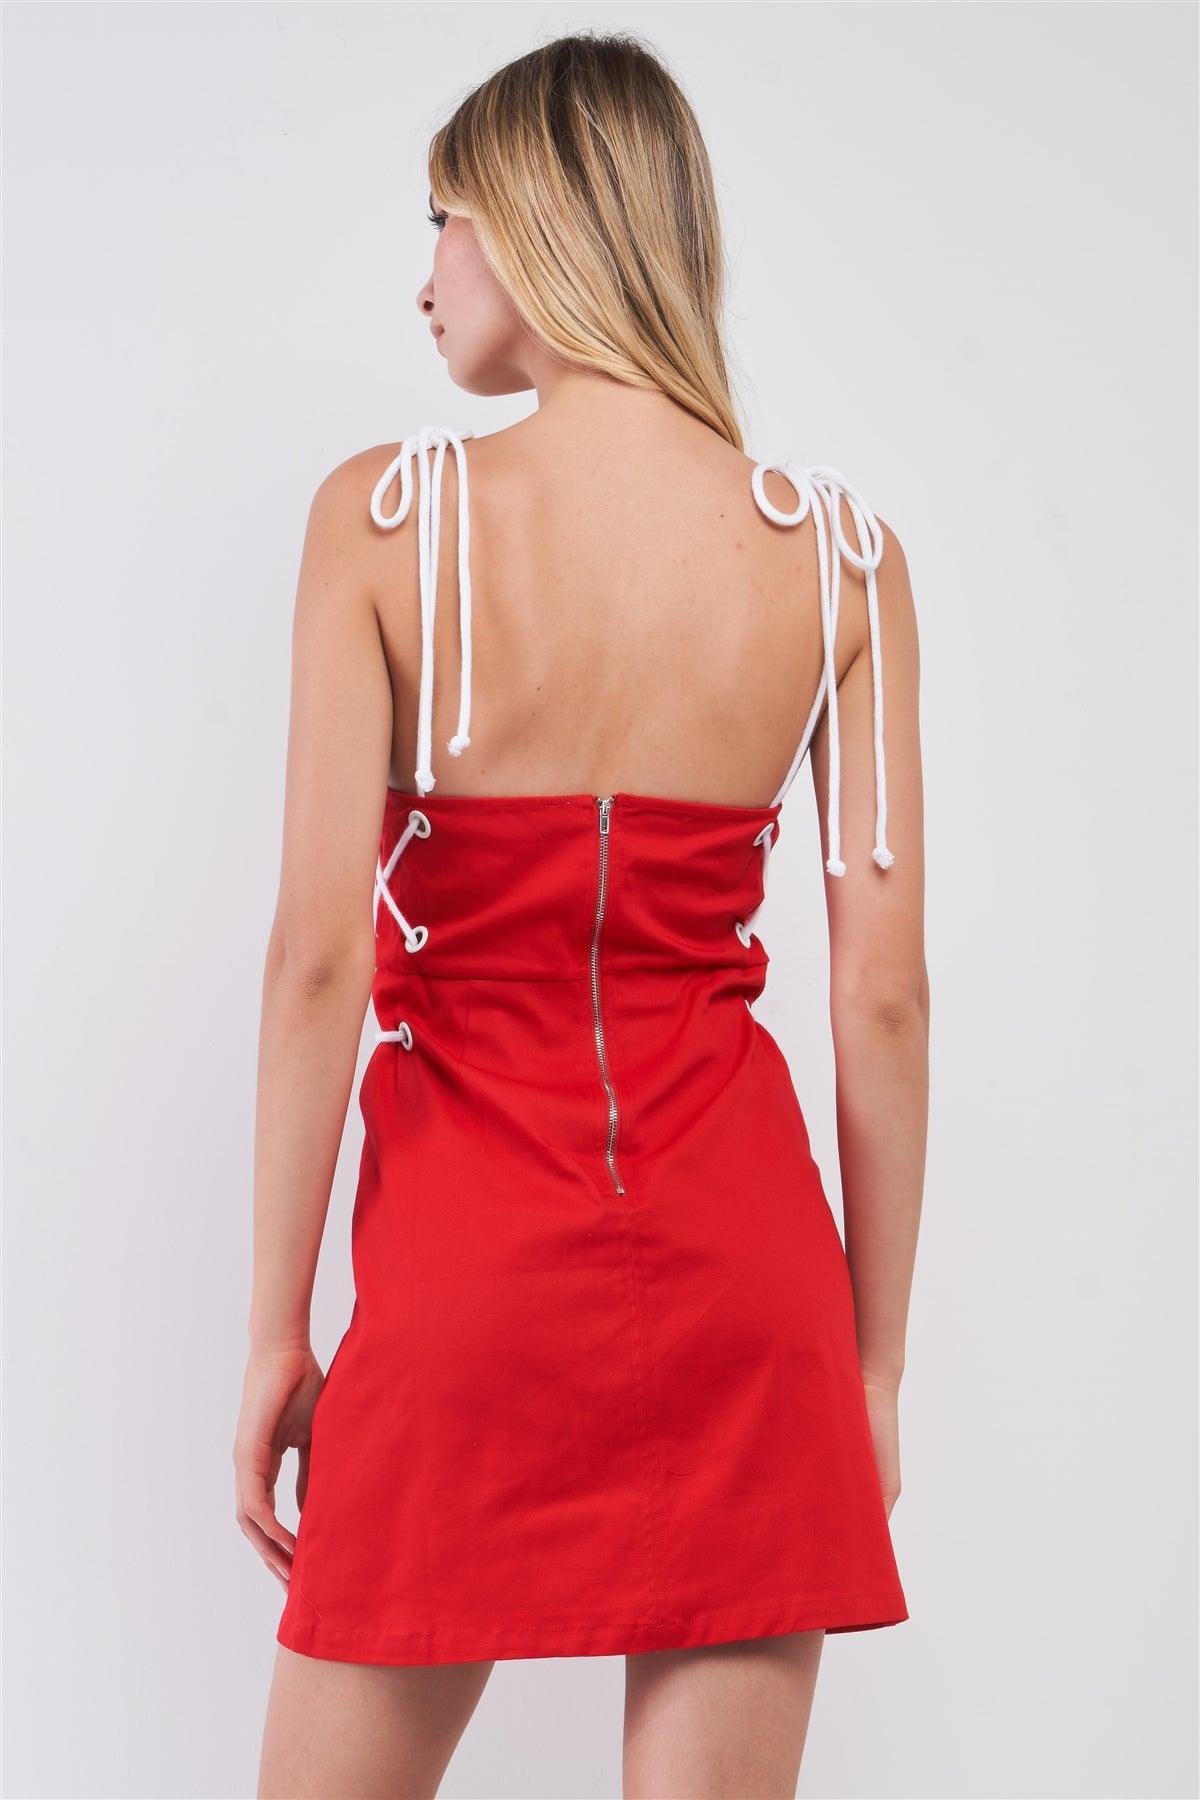 Red & White Lace-Up Straps Sleeveless Square Neck Fitted Mini Dress /2-2-1-1